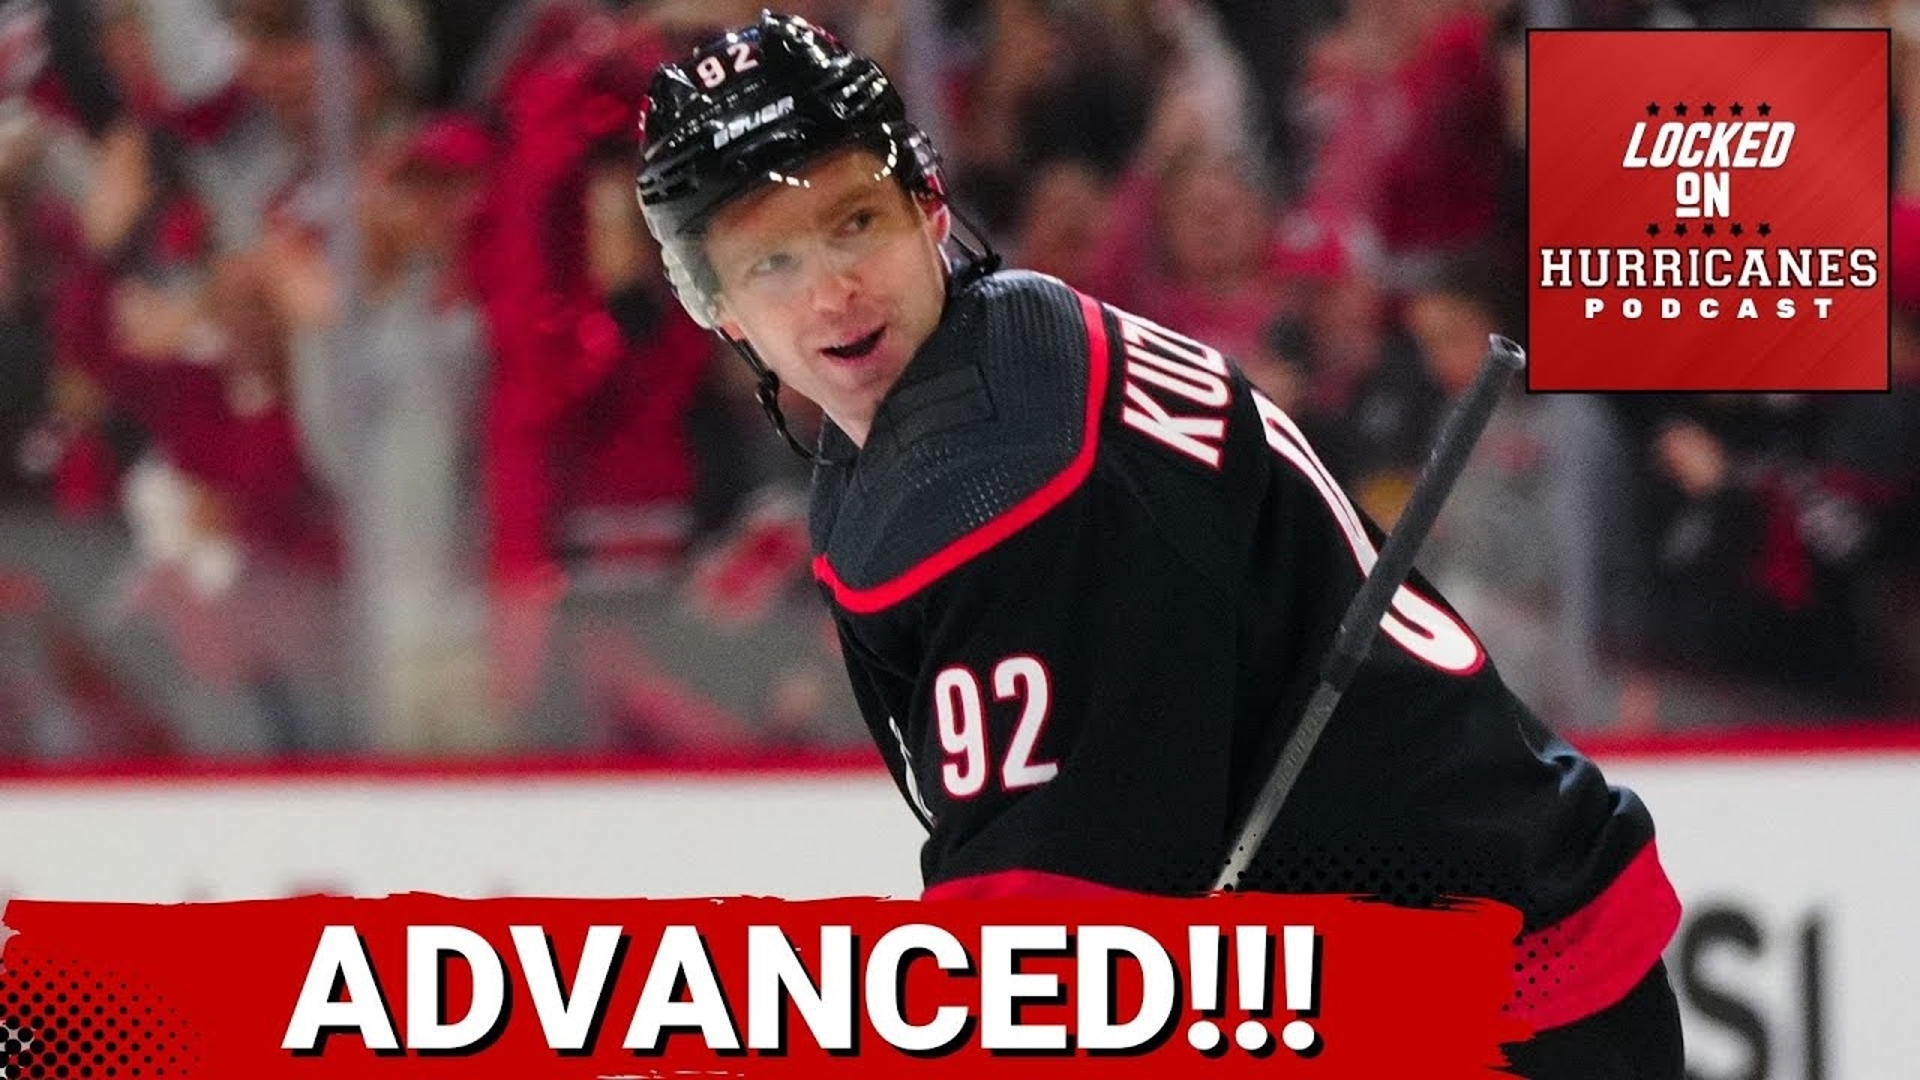 On a Wednesday & Series Clinching Edition of Locked On Hurricanes, the Carolina Hurricanes defeated the New York Islanders 6-3 on Tuesday night to advance.